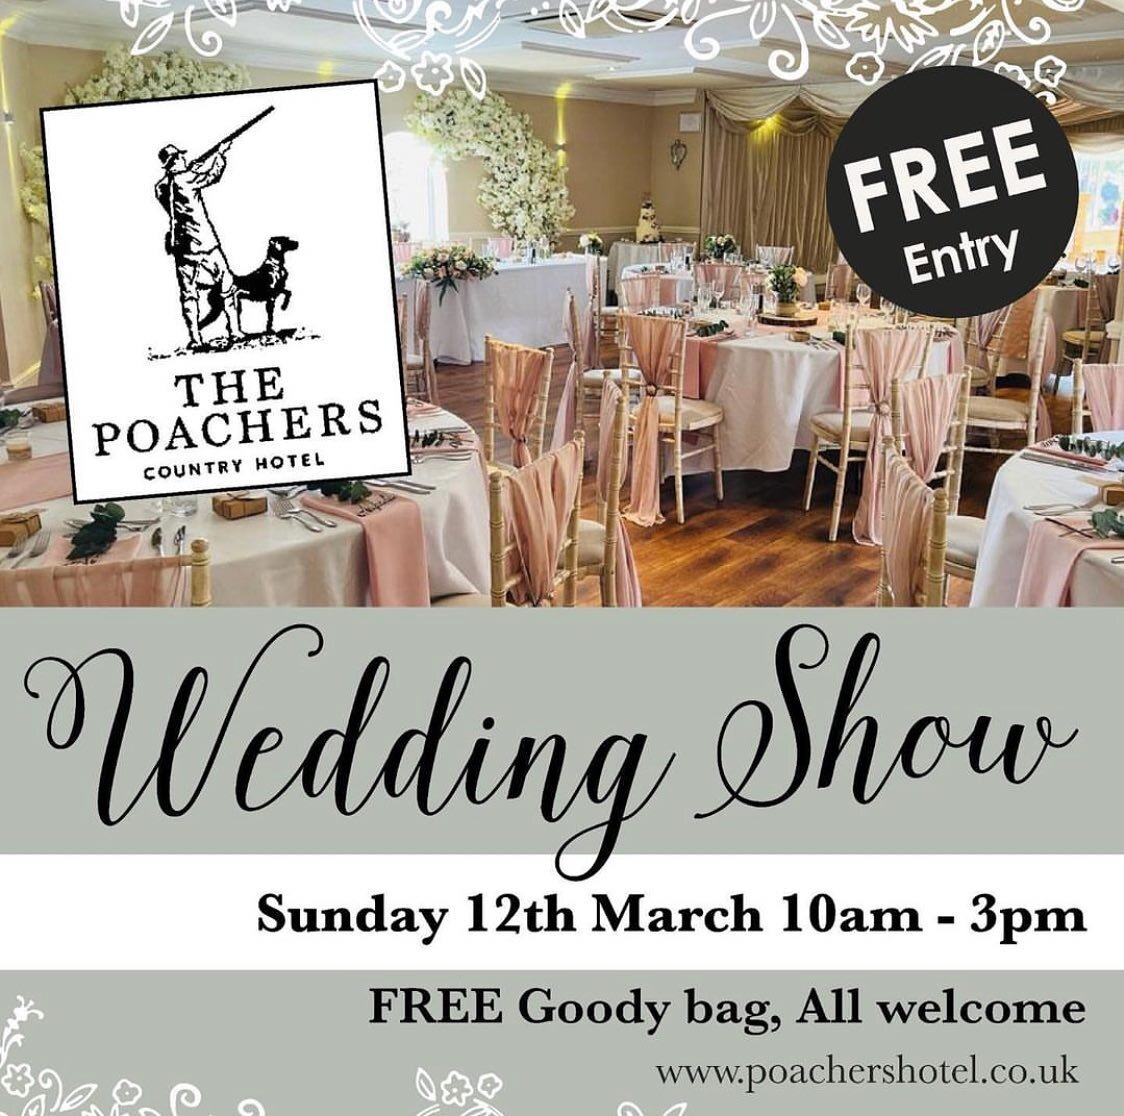 This Sunday I will be at @the_poachers_country_hotel  for their latest Wedding Show 10 - 3pm

I&rsquo;ll be joined by some fantastic suppliers

Catering Team : @bandrdining 
Stunning Venue Dressing : @loubear_events &amp; @the_backdrop_boutique 
Wedd